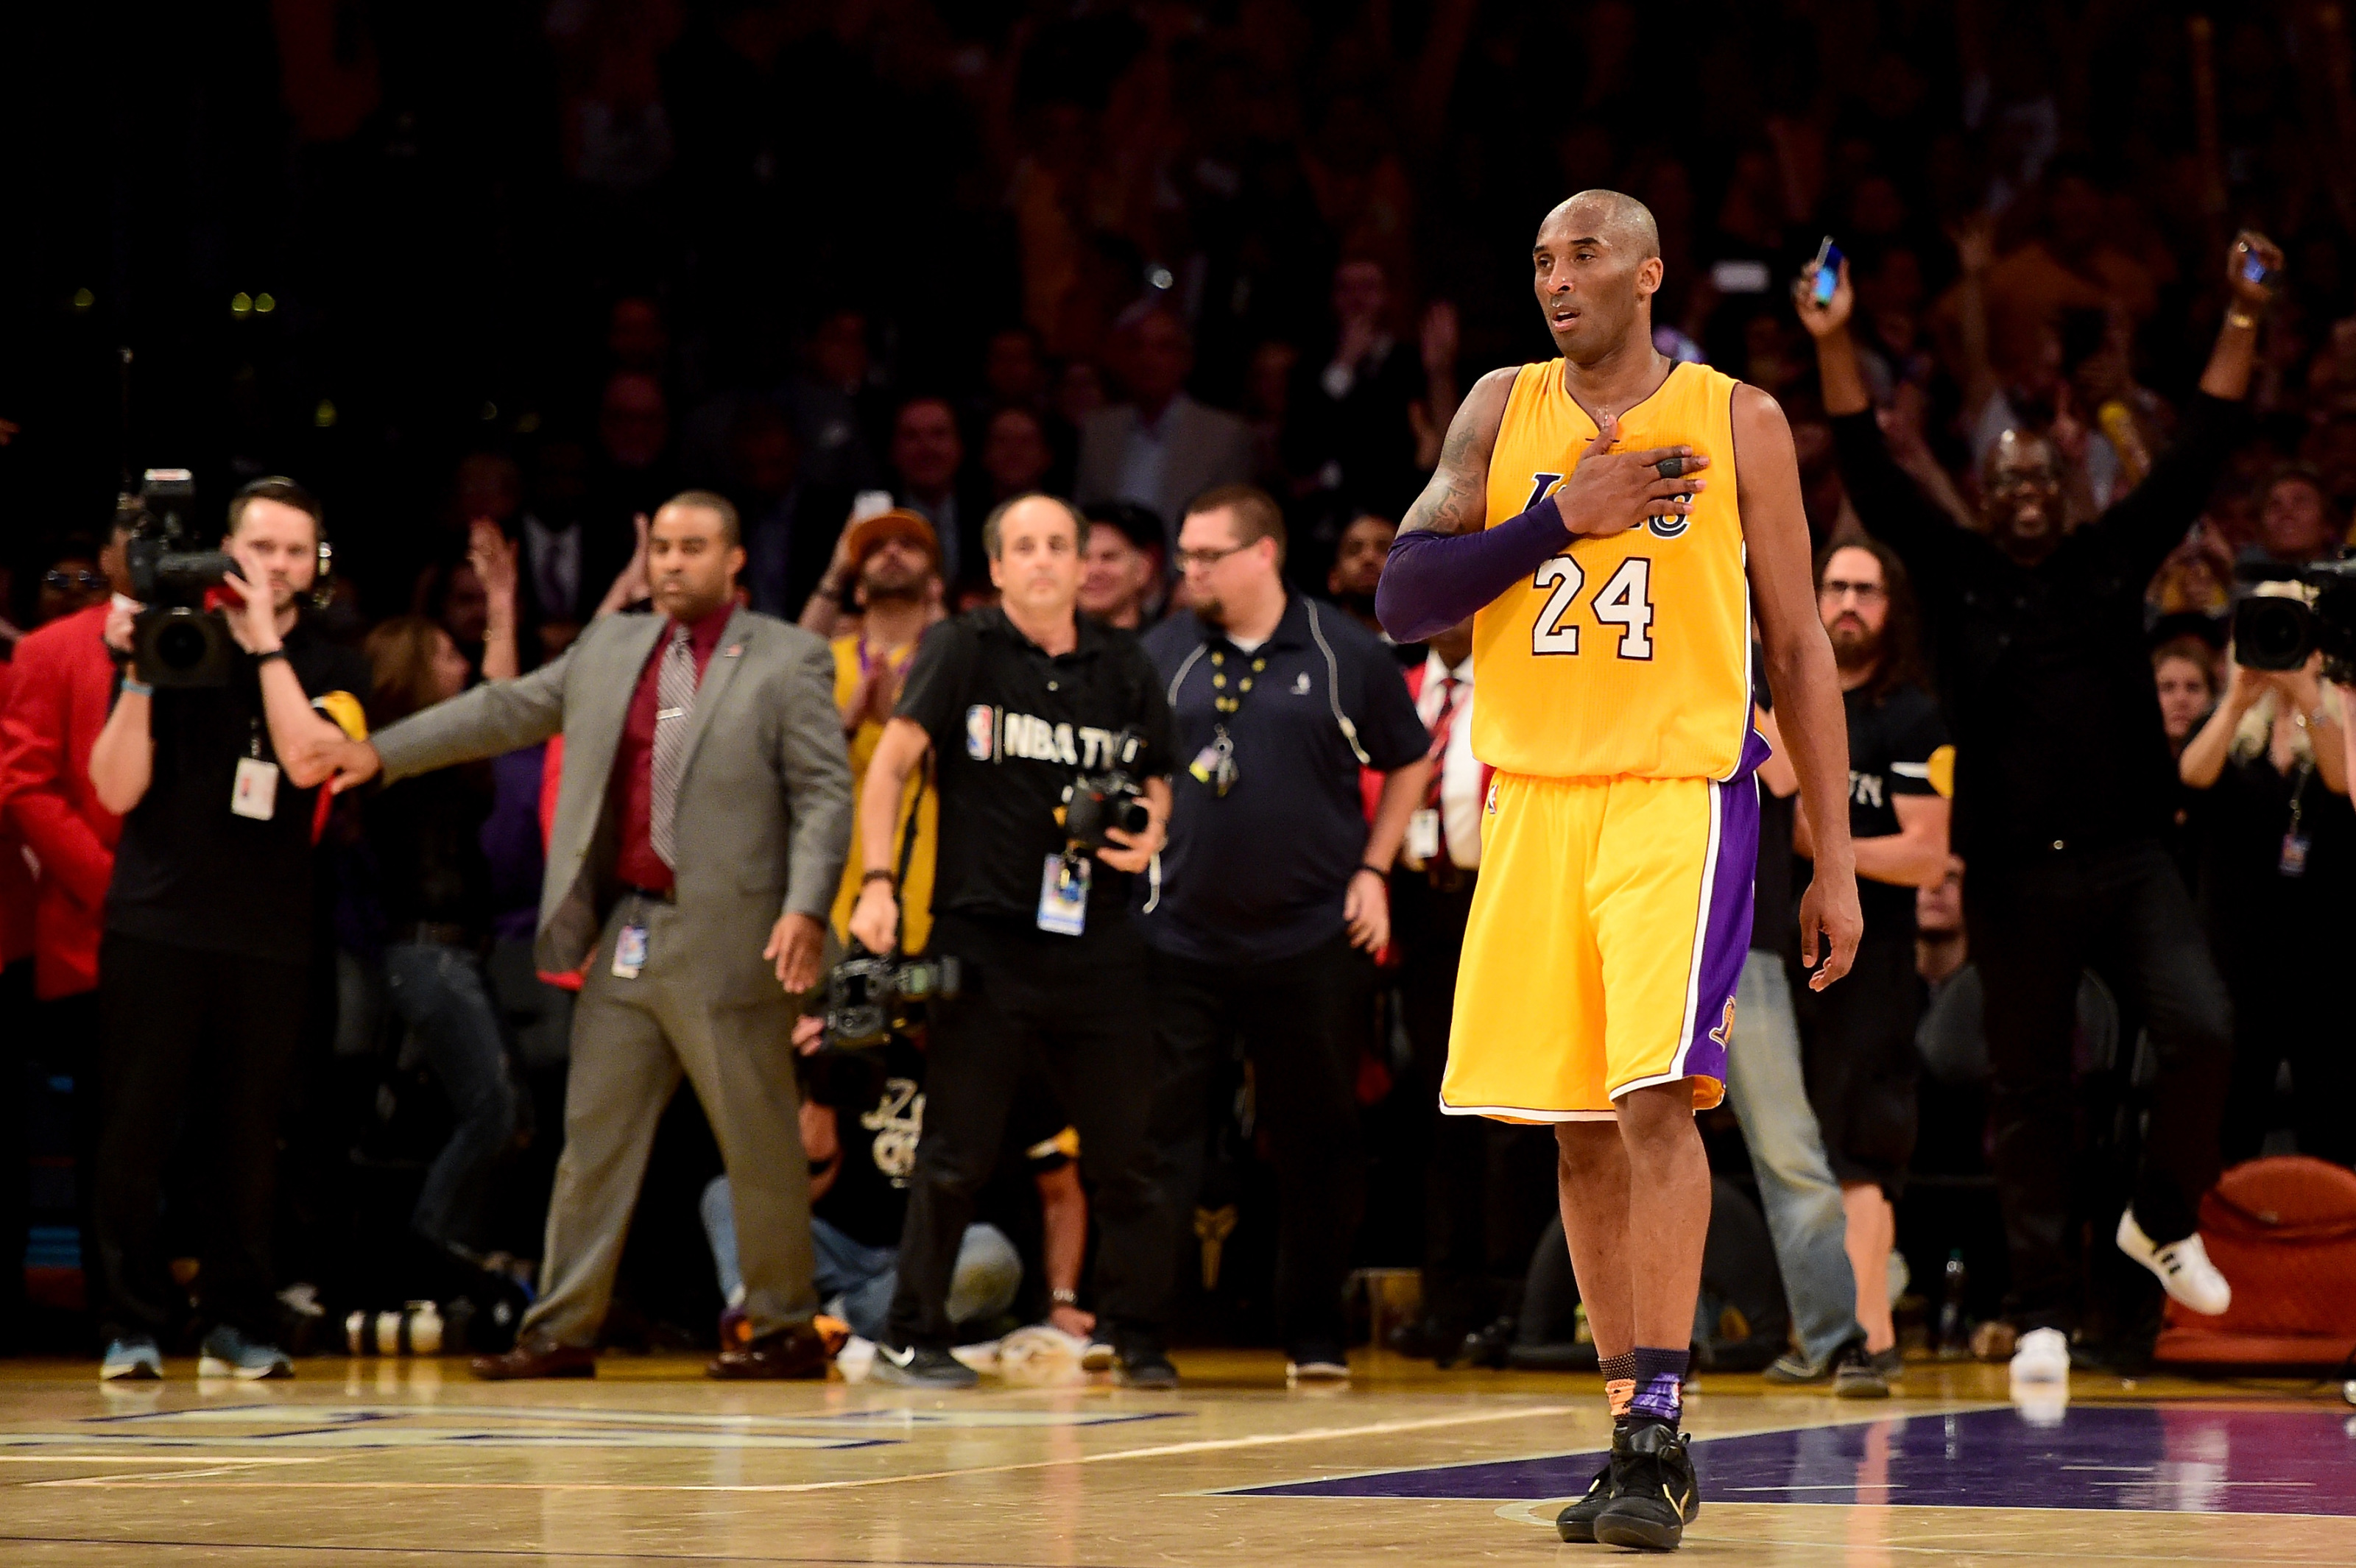 Retirement at 60: Kobe Bryant's finale is one for the ages